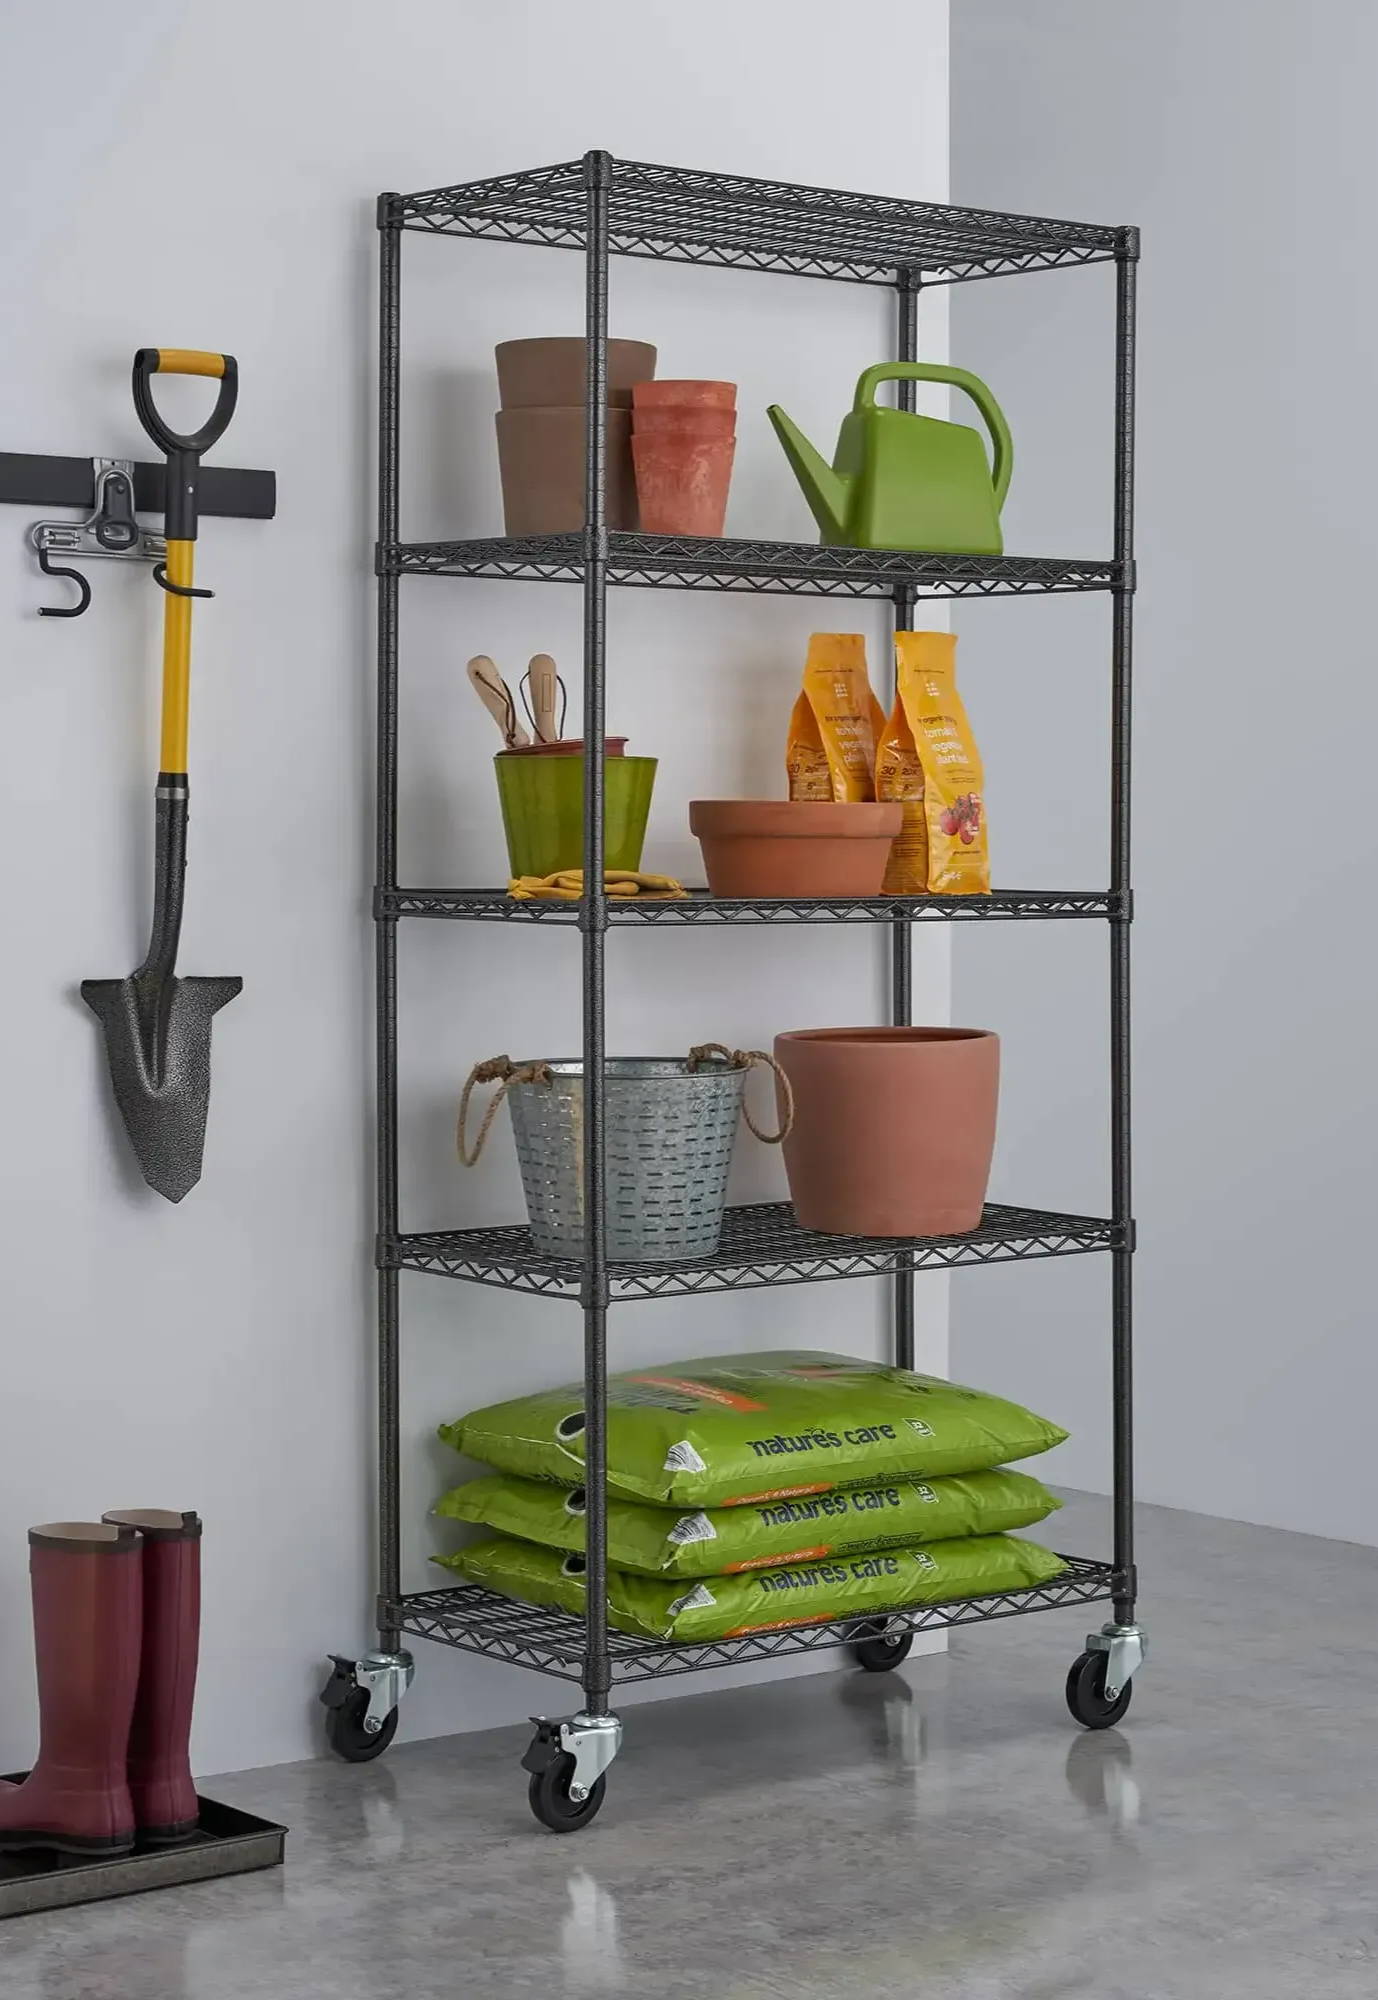 black wire shelving rack in a garage filled with gardening supplies